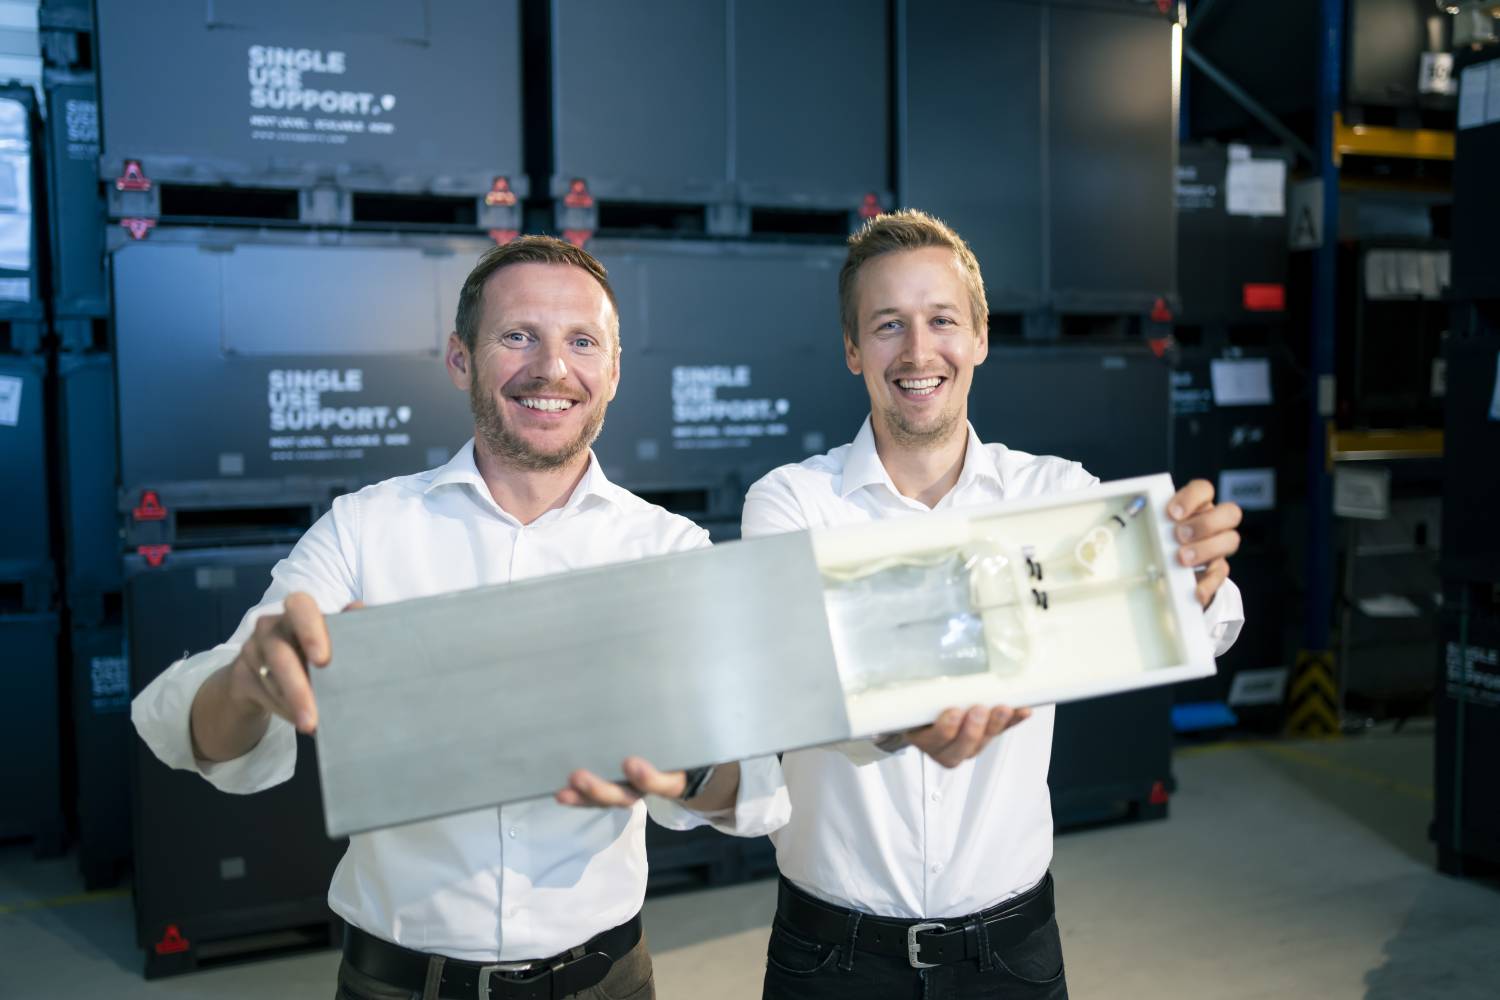 “Entrepreneurs Of The Year” Thomas Wurm und Johannes Kirchmair ©Single Use Support